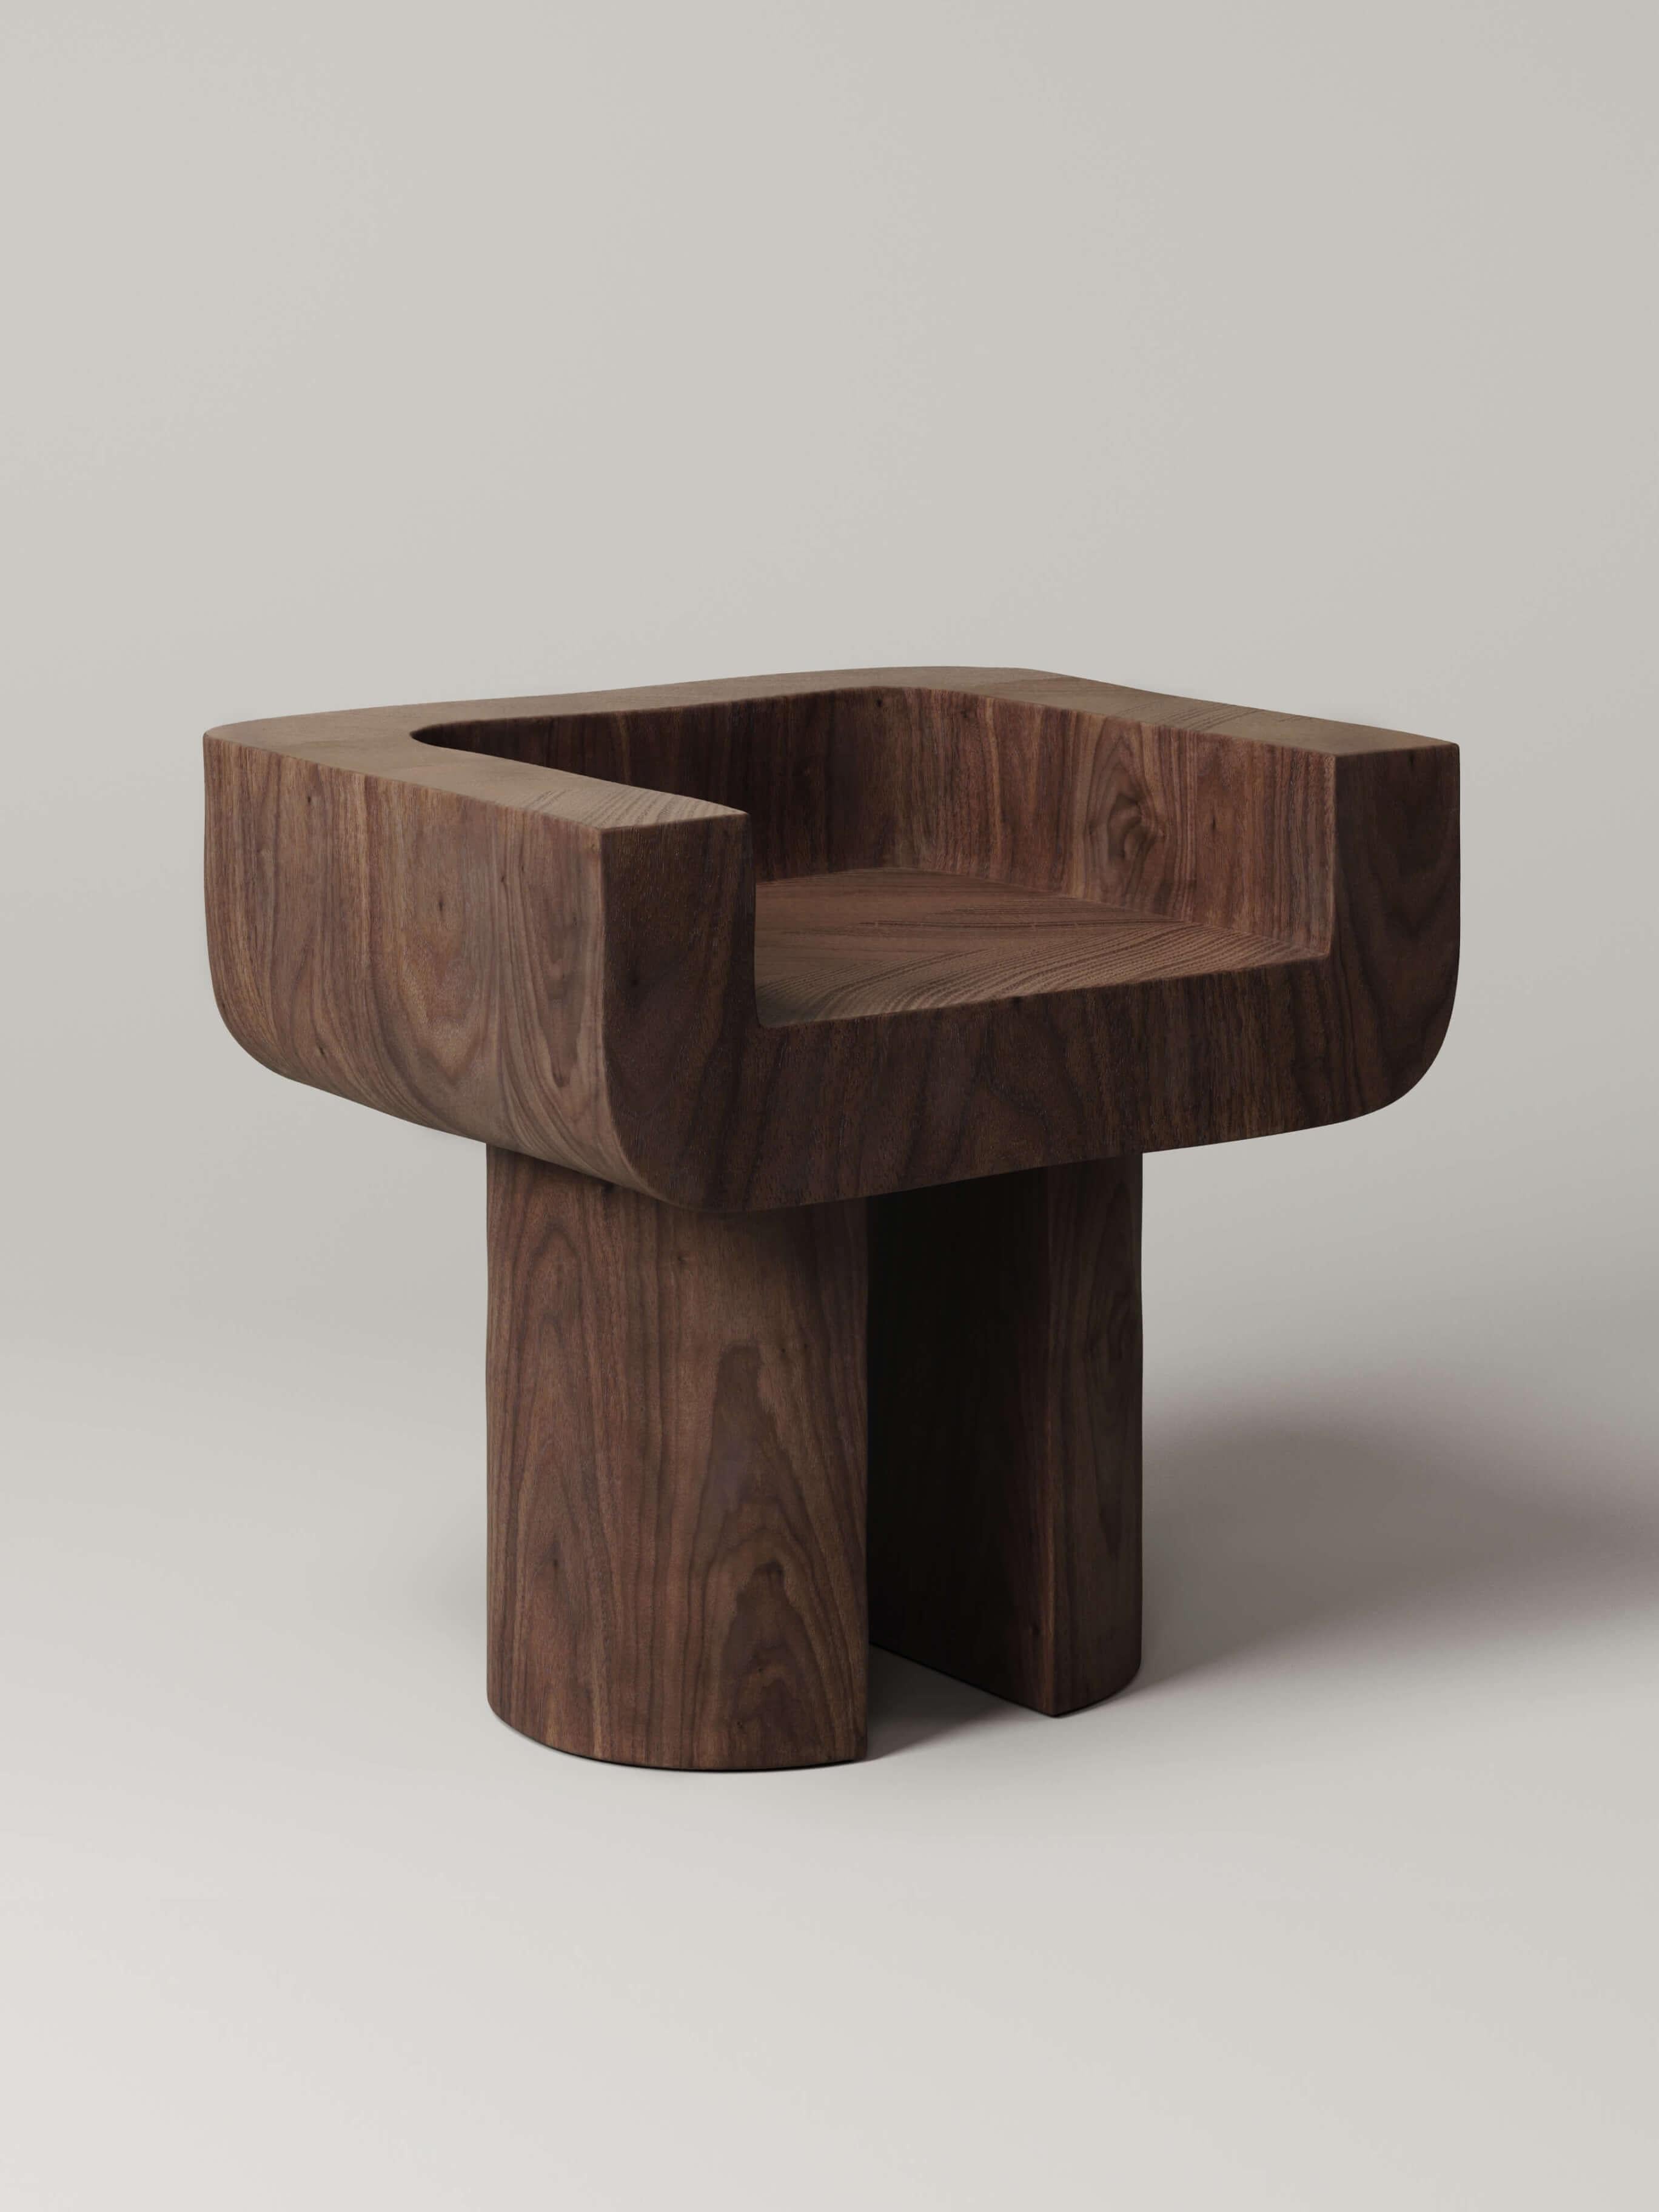 Carved from thick walnut, the heavily proportioned silhouette, smooth curves, and powerful stature of the M_001 chair push the limits of chair design.

Numbered, Signed, and includes Certificate of Authenticity

*Given the unique nature of walnut,